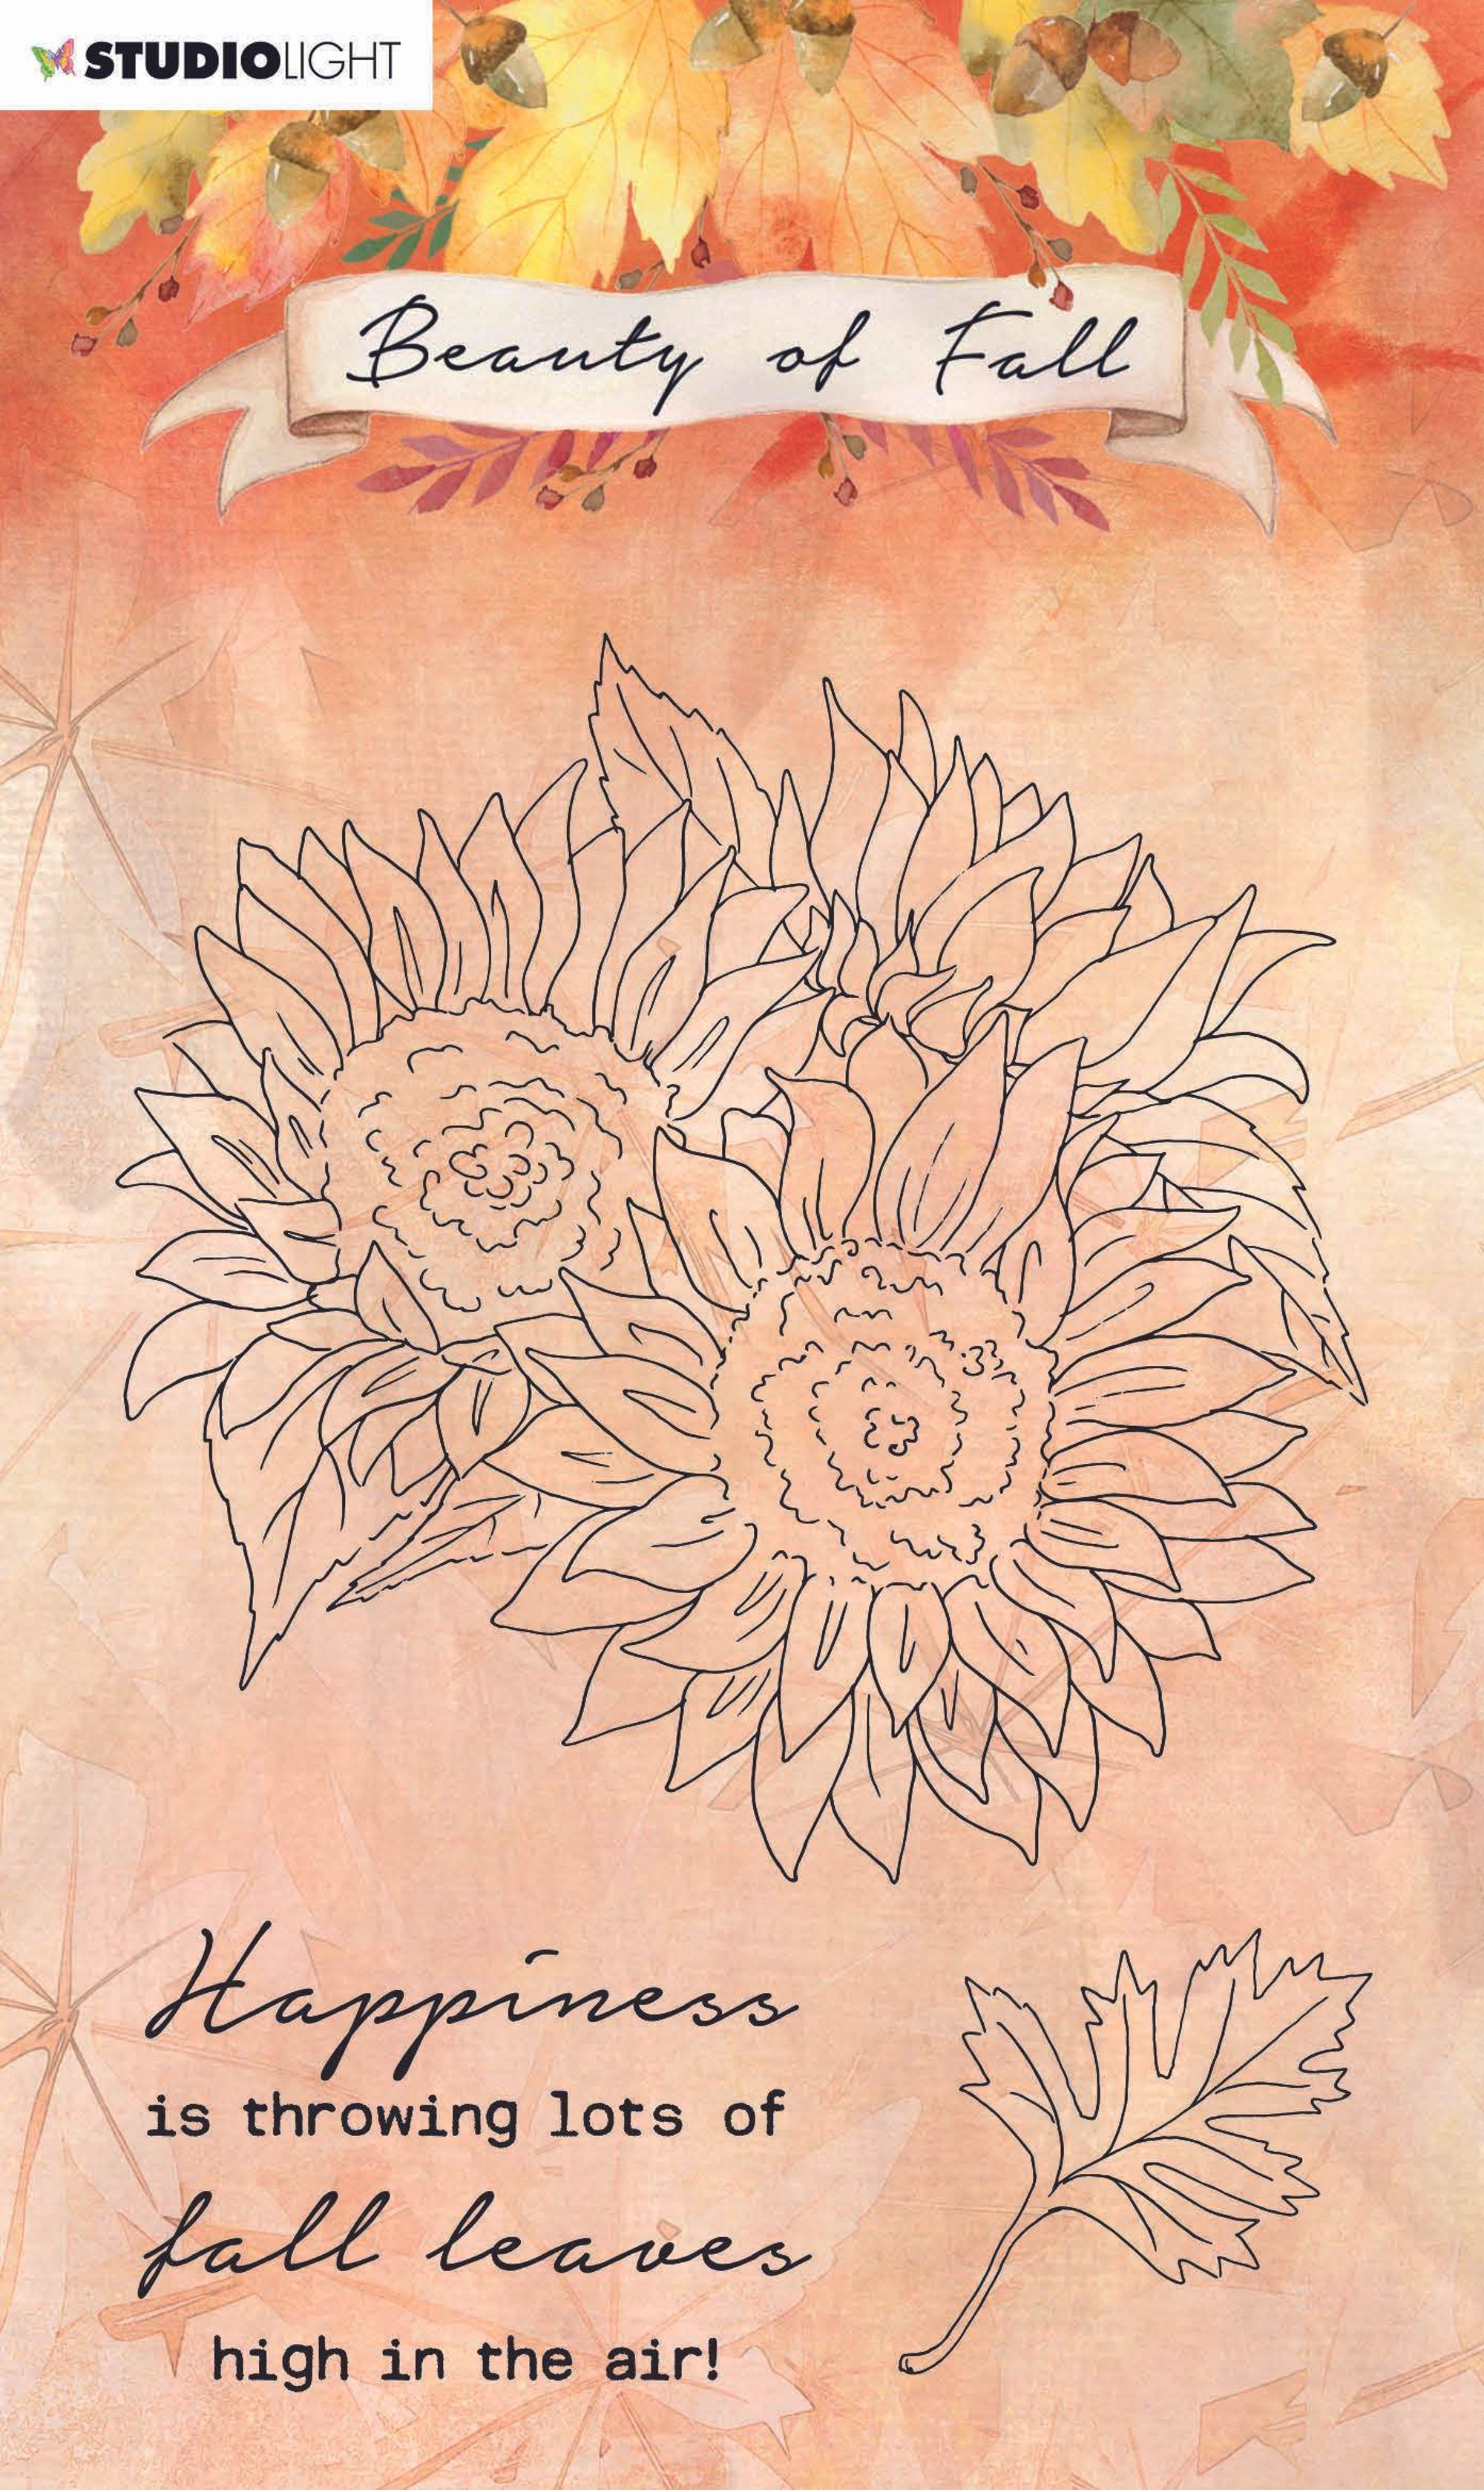 SL Clear Stamp Sunflowers Beauty Of Fall 105x148mm nr.63